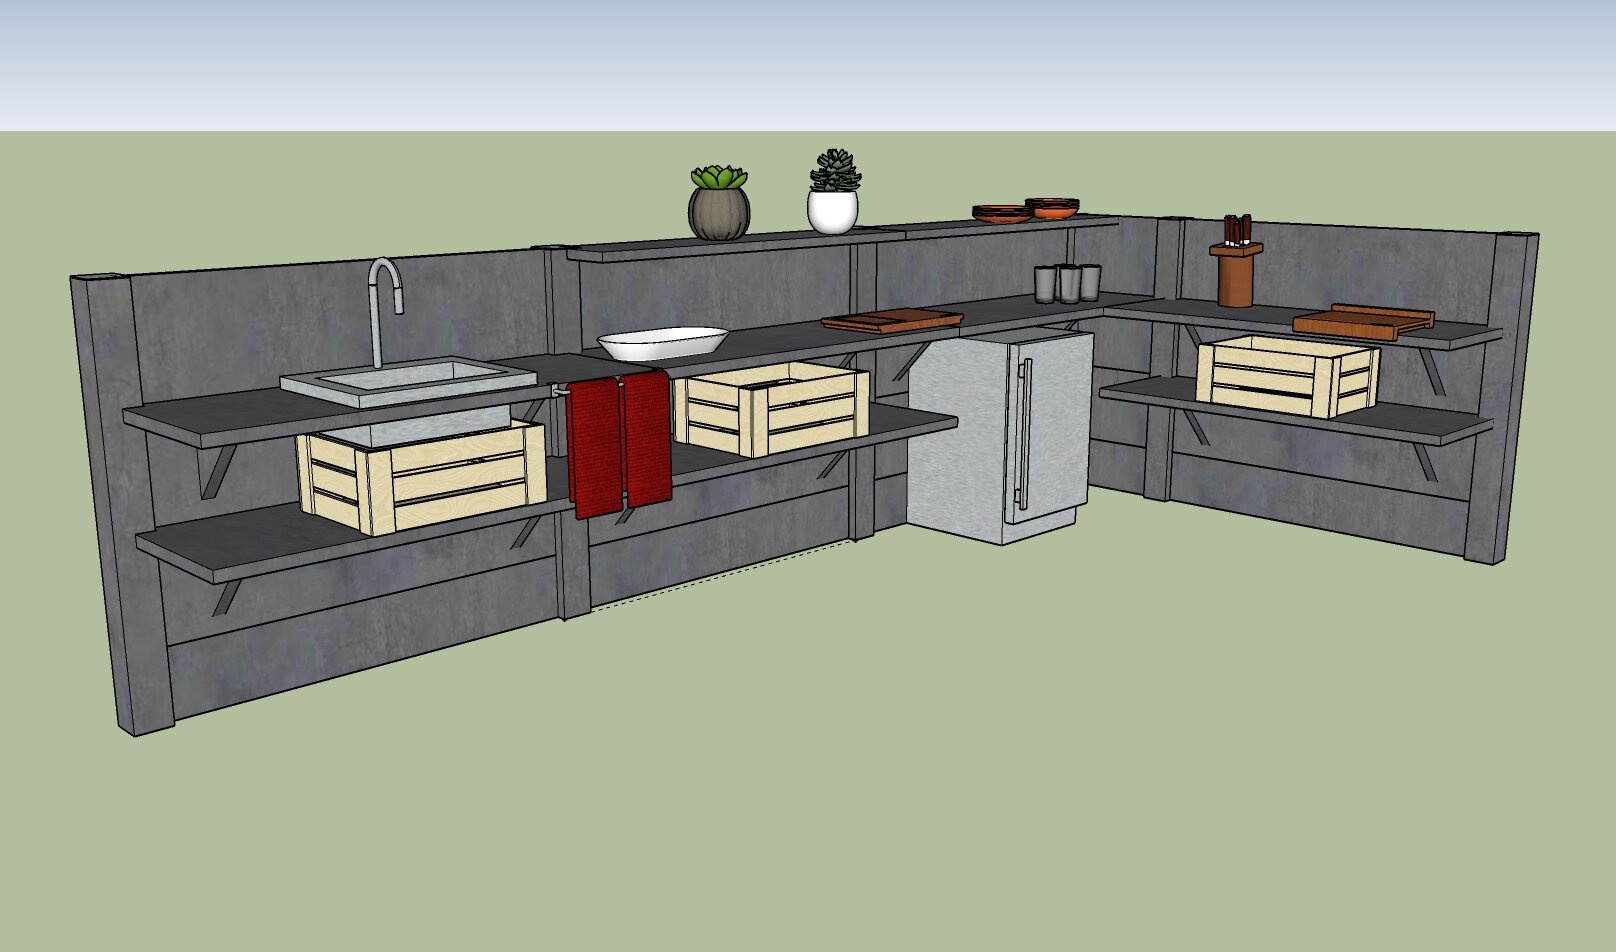 Proposed Kitchen 1.0- Carrie Parris.jpg